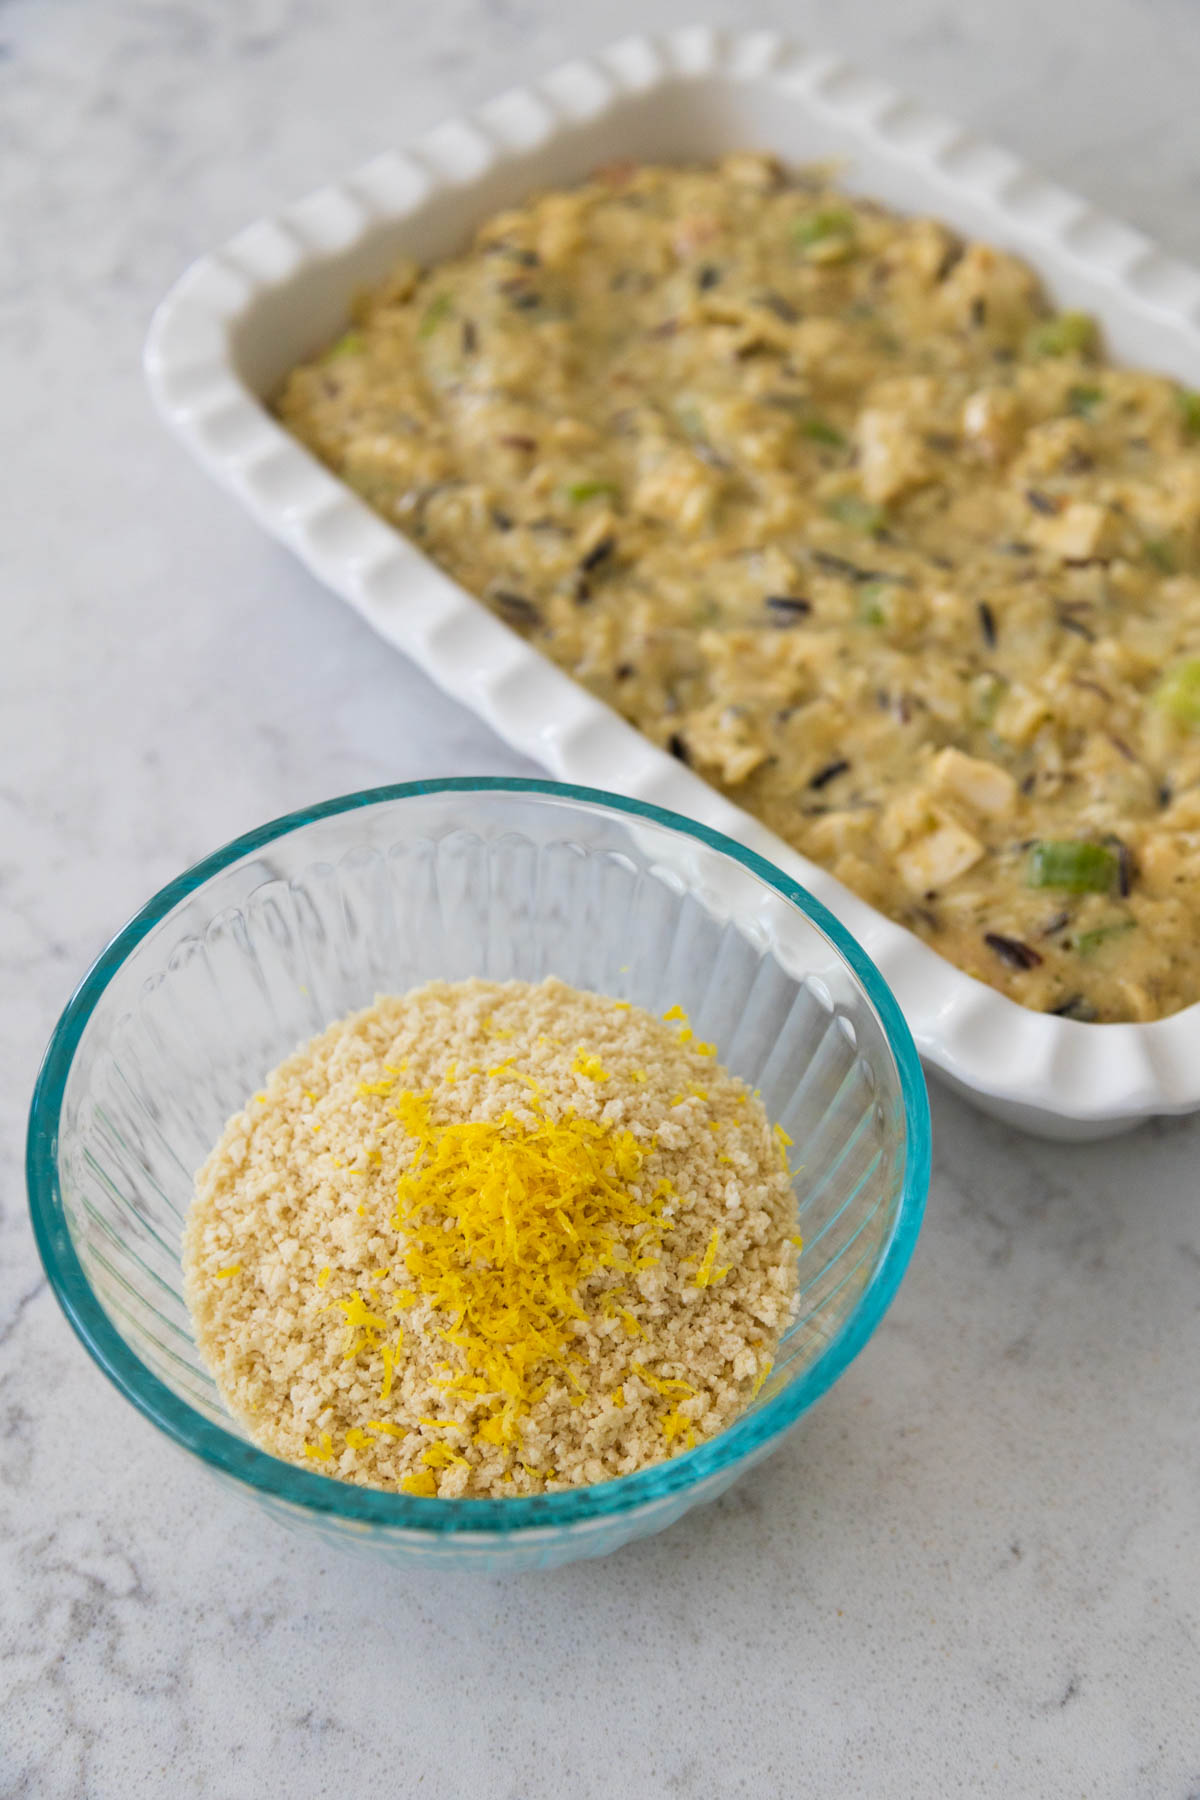 A bowl of breadcrumbs with lemon zest on top sits next to the baking dish filled with creamy chicken.